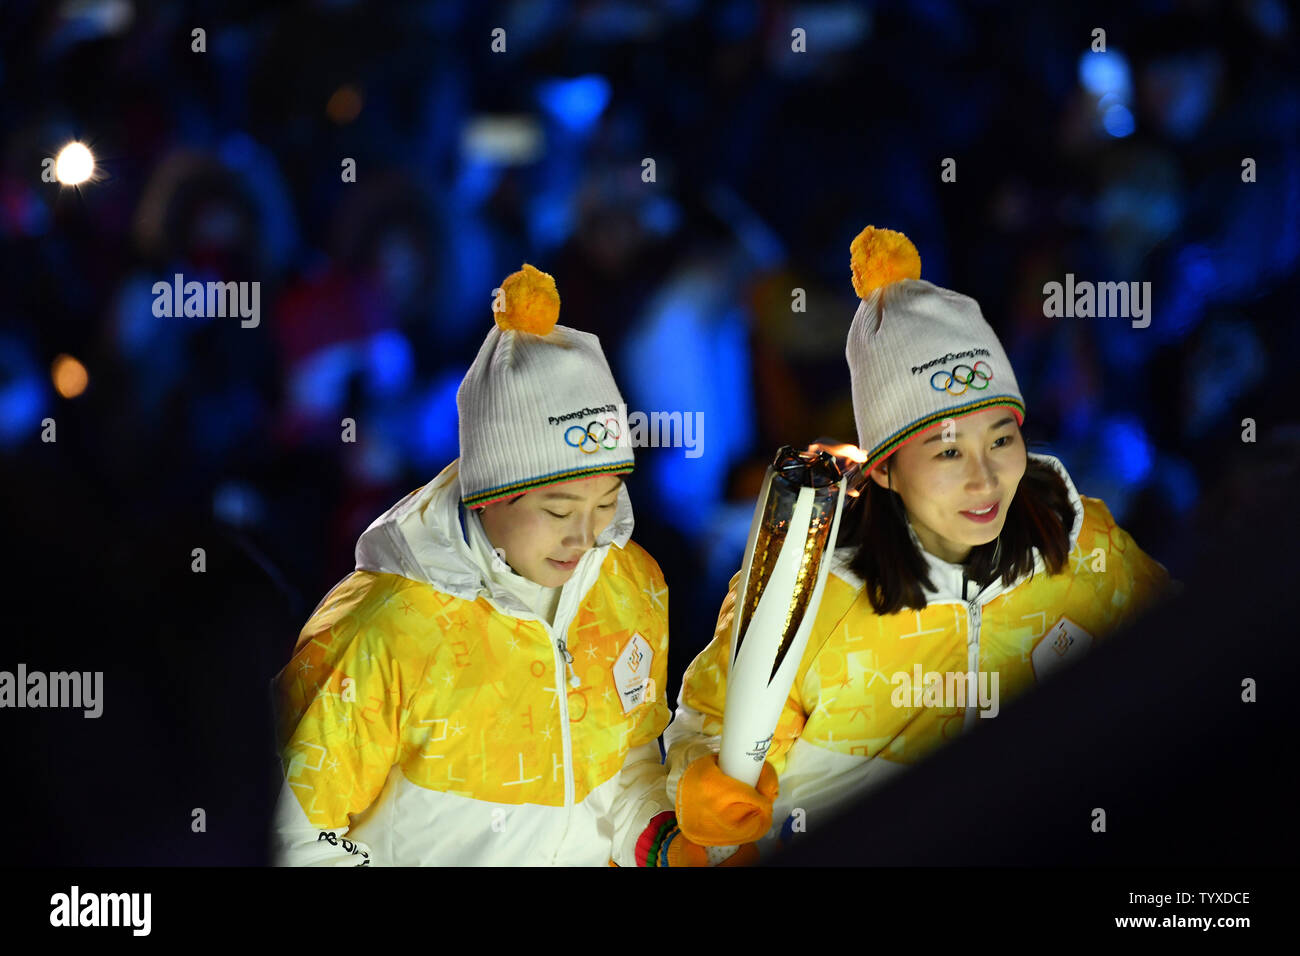 The Olympic torch is carried up the ramp to light the cauldron by two members of the mixed North and South Korean women's hockey team, Chung Su-hyon of North Korea and Park Jong-ah of South Korea during the opening ceremony at the Pyeongchang 2018 Winter Olympics, at the Olympic Stadium in Daegwalnyeong, South Korea, on February 9, 2018. photo by Richard Ellis/UPI Stock Photo